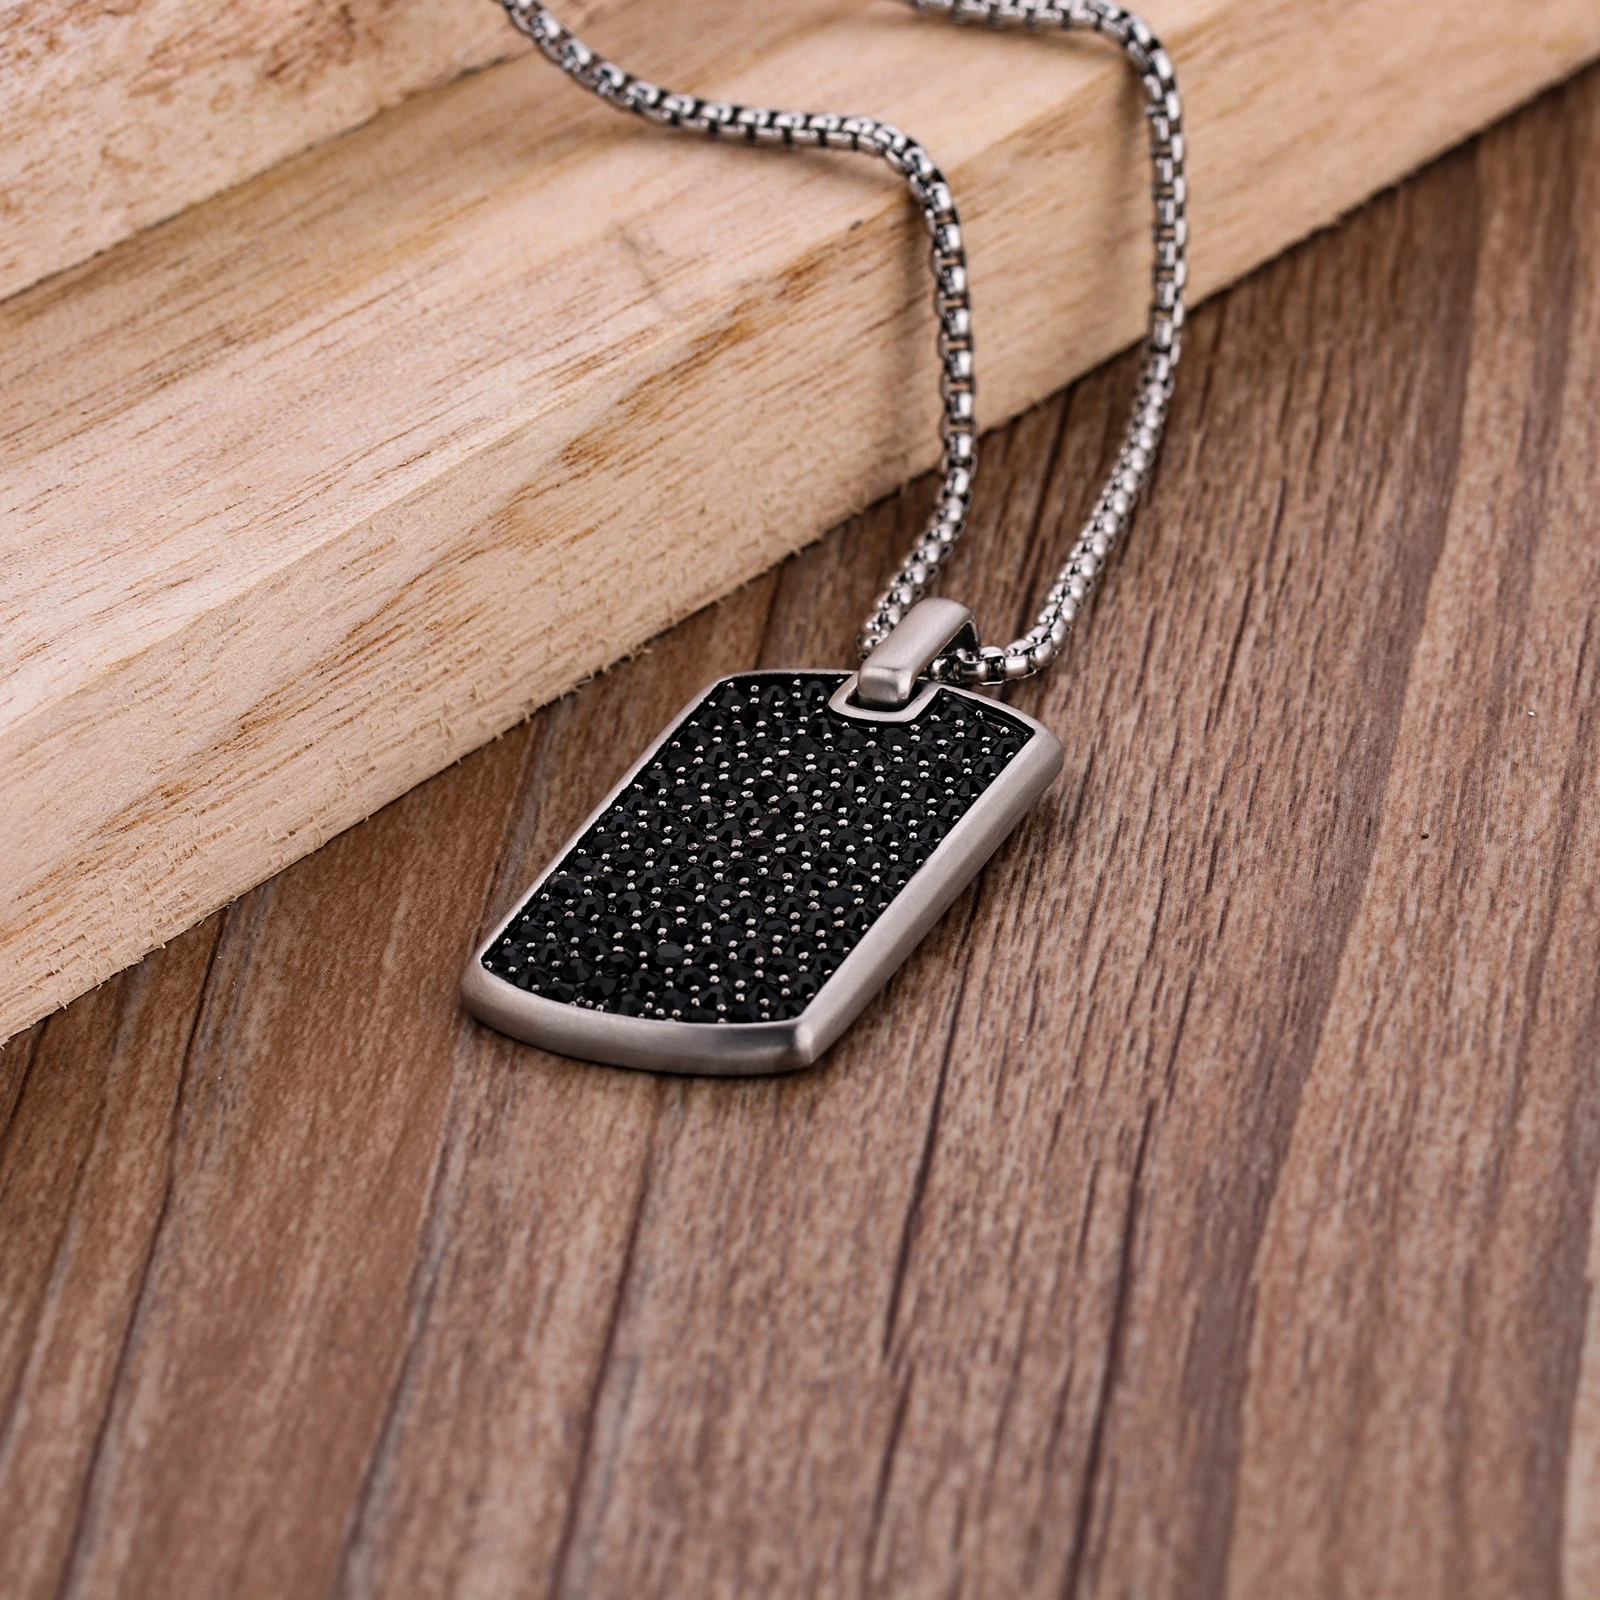 Hot Military Dog Tag Mens Stainless Steel Pendant Ball Bead Chain Necklace CtSP 